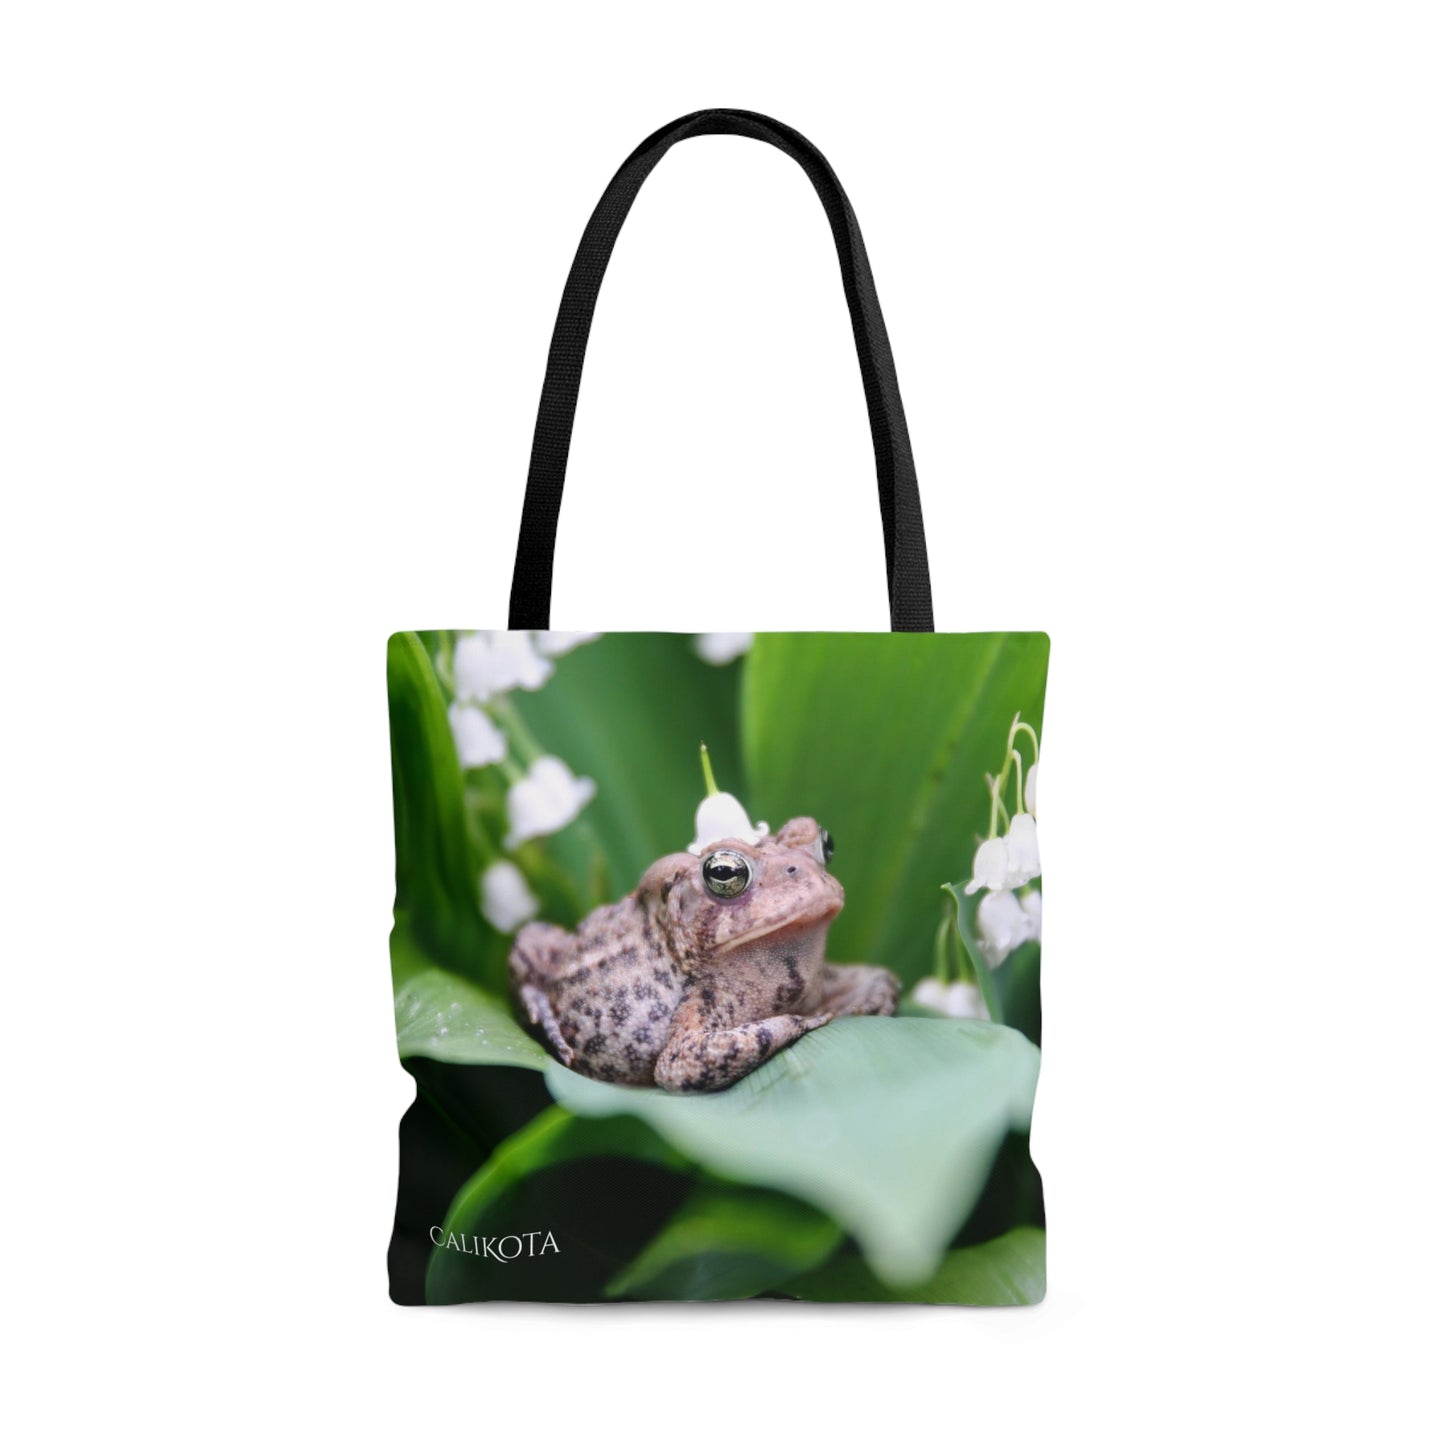 Toad lily of the valley tote bag